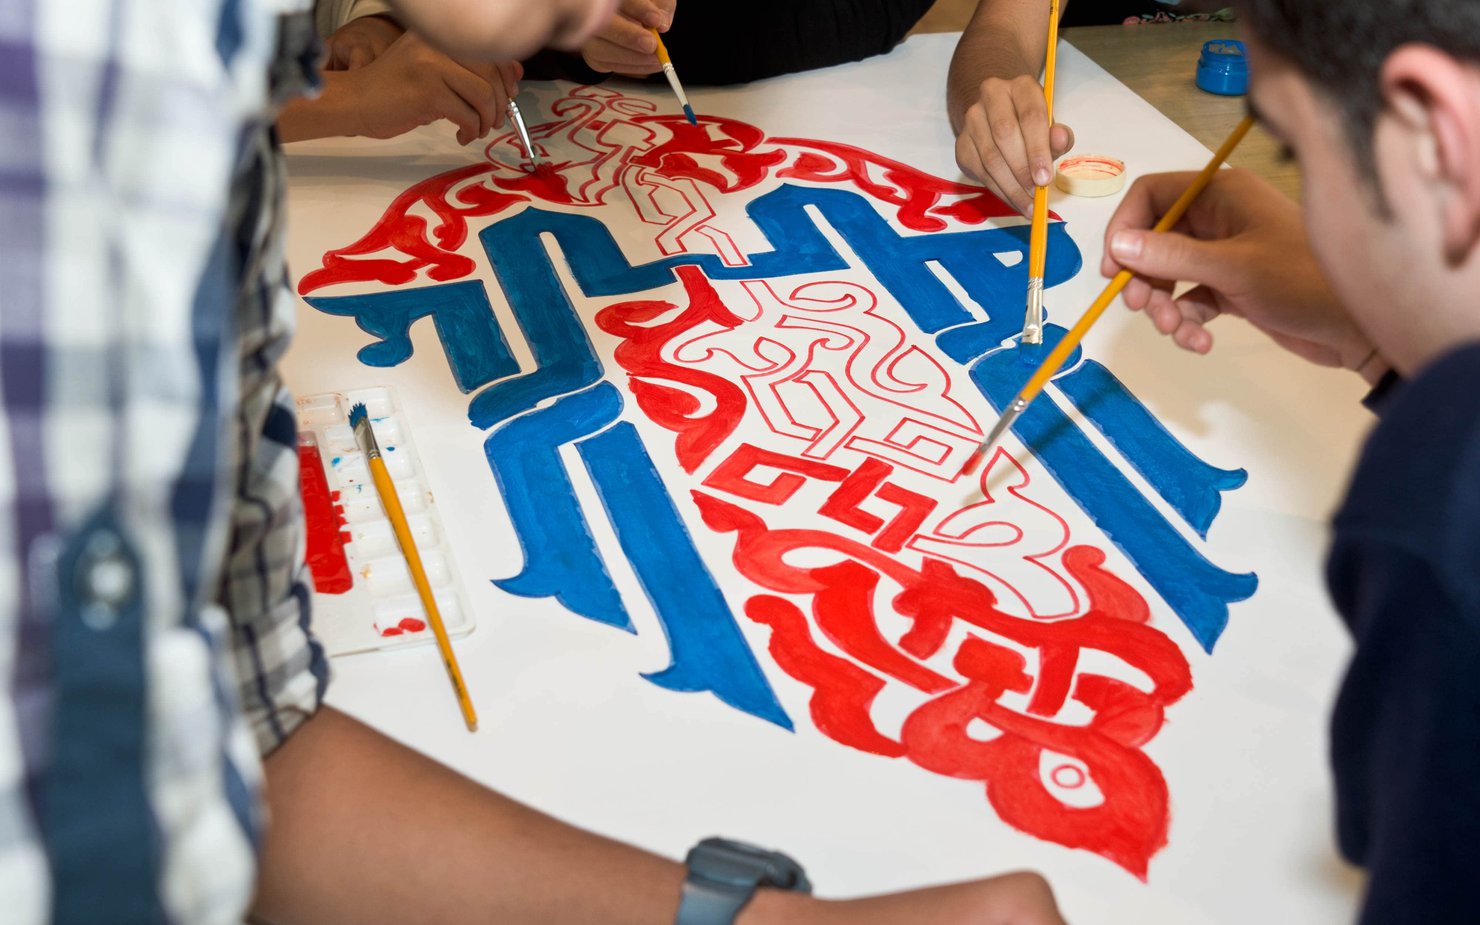 A group of workshop attendees use blue and red paint to color large calligraphy letters